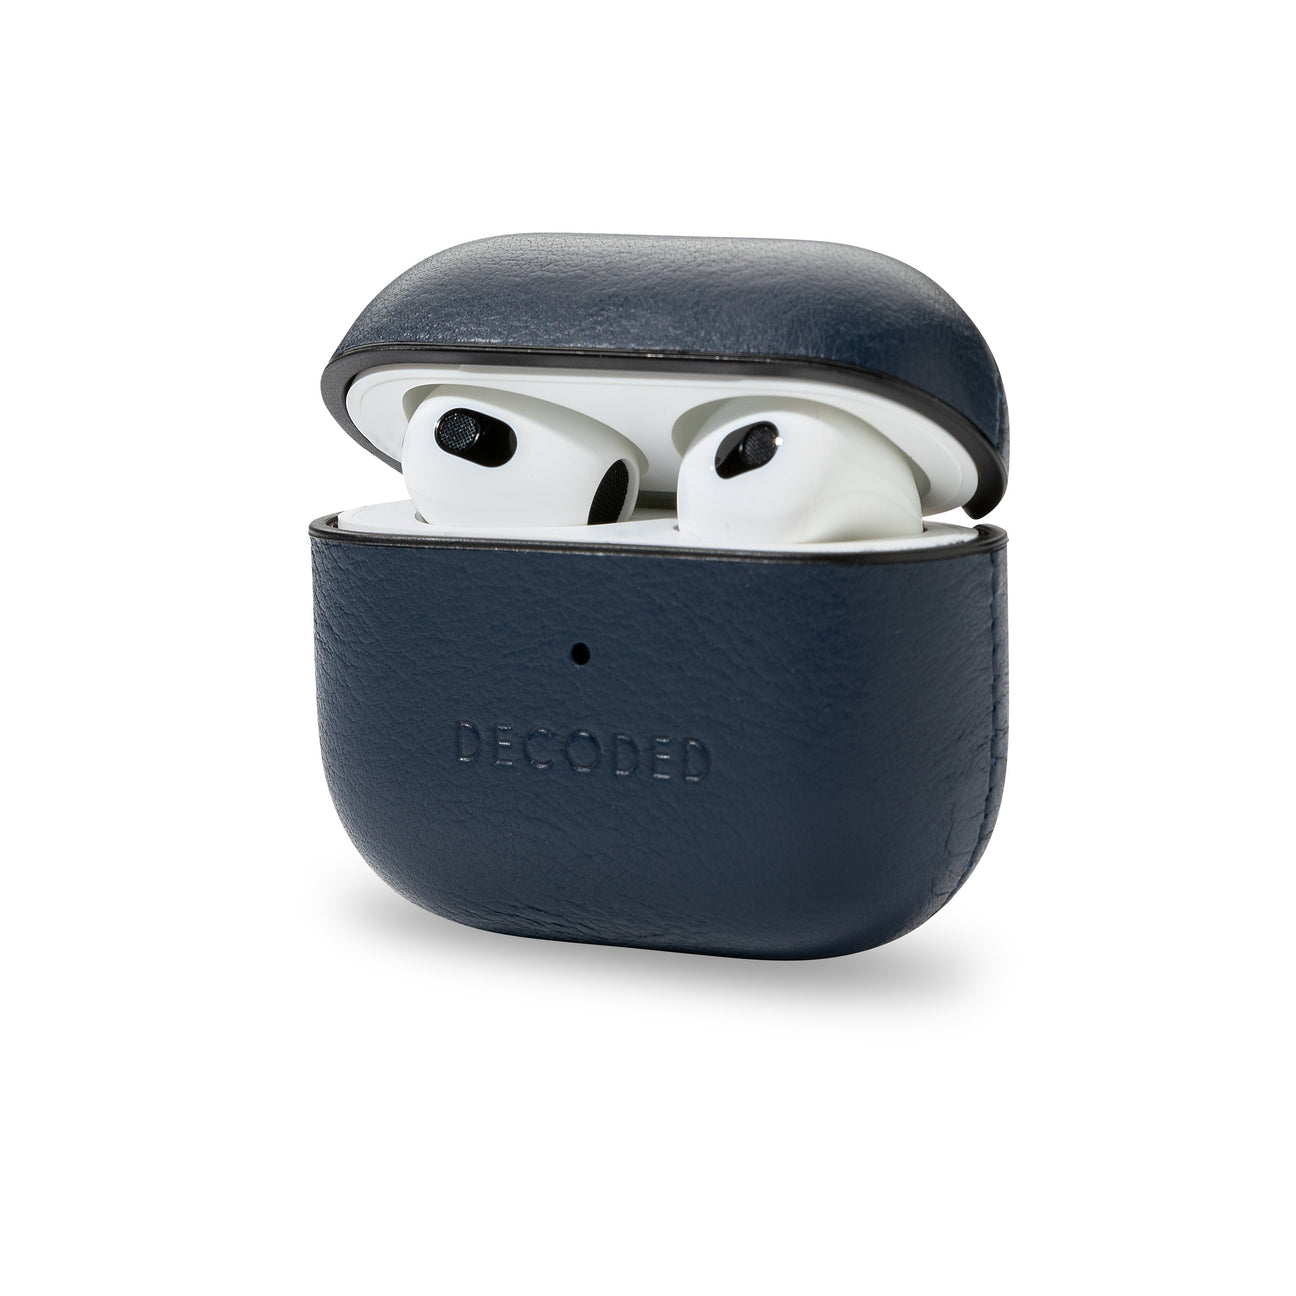 Decoded - AirCase Lite Navy - AirPods 3rd Gen